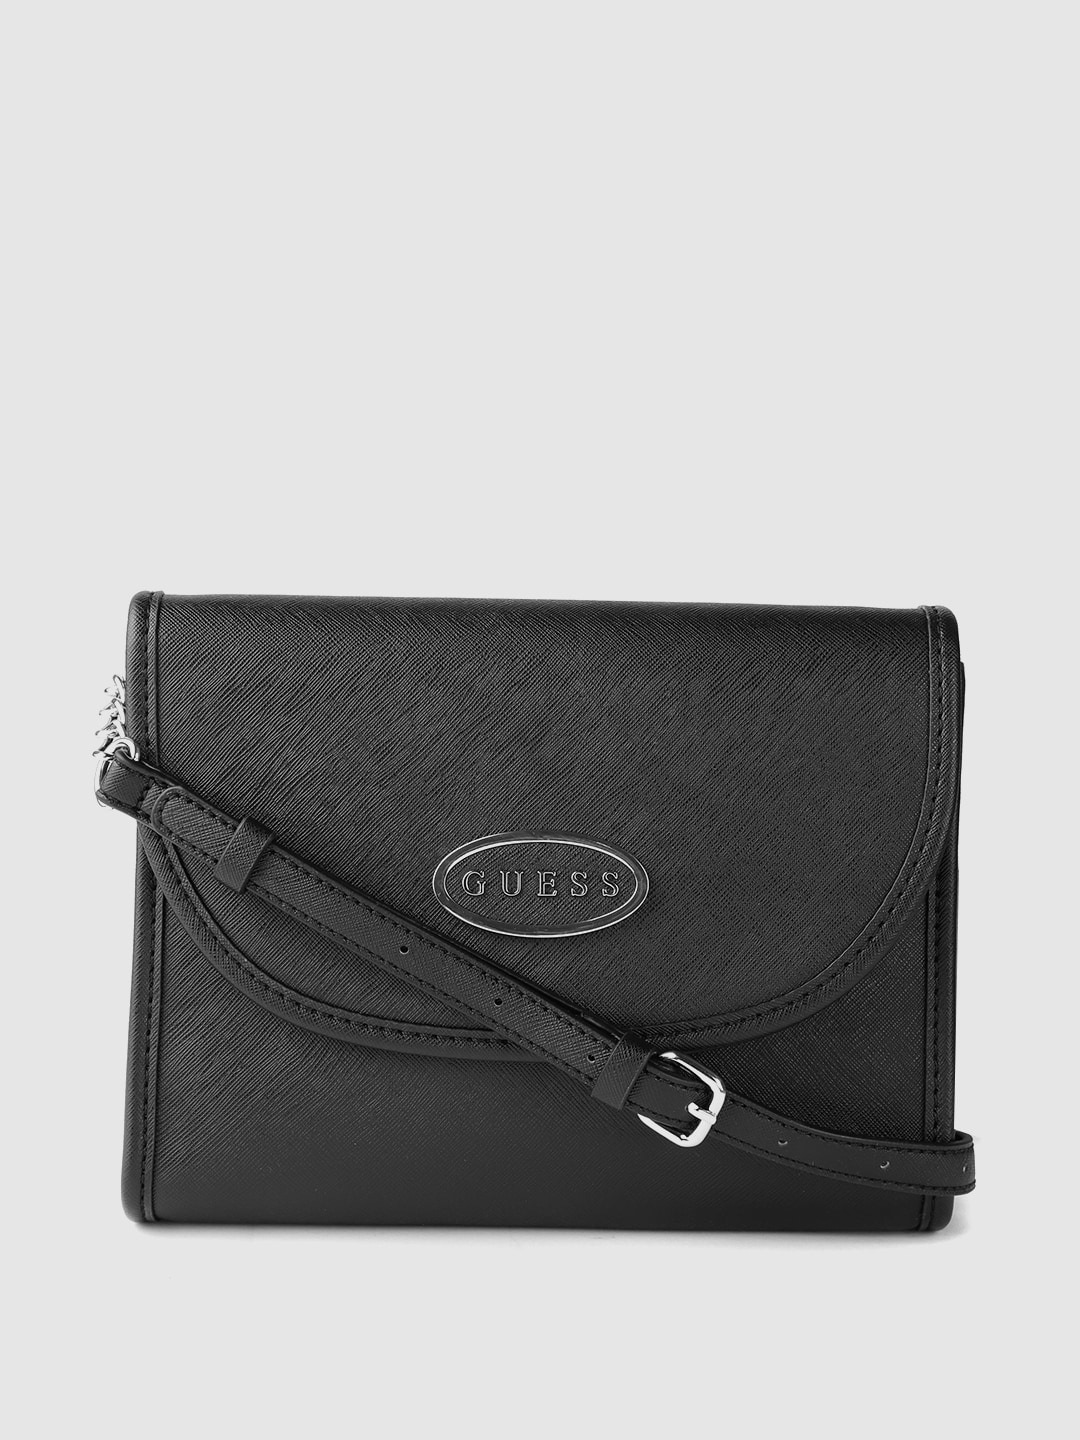 GUESS Women Black Solid Structured Sling Bag Price in India